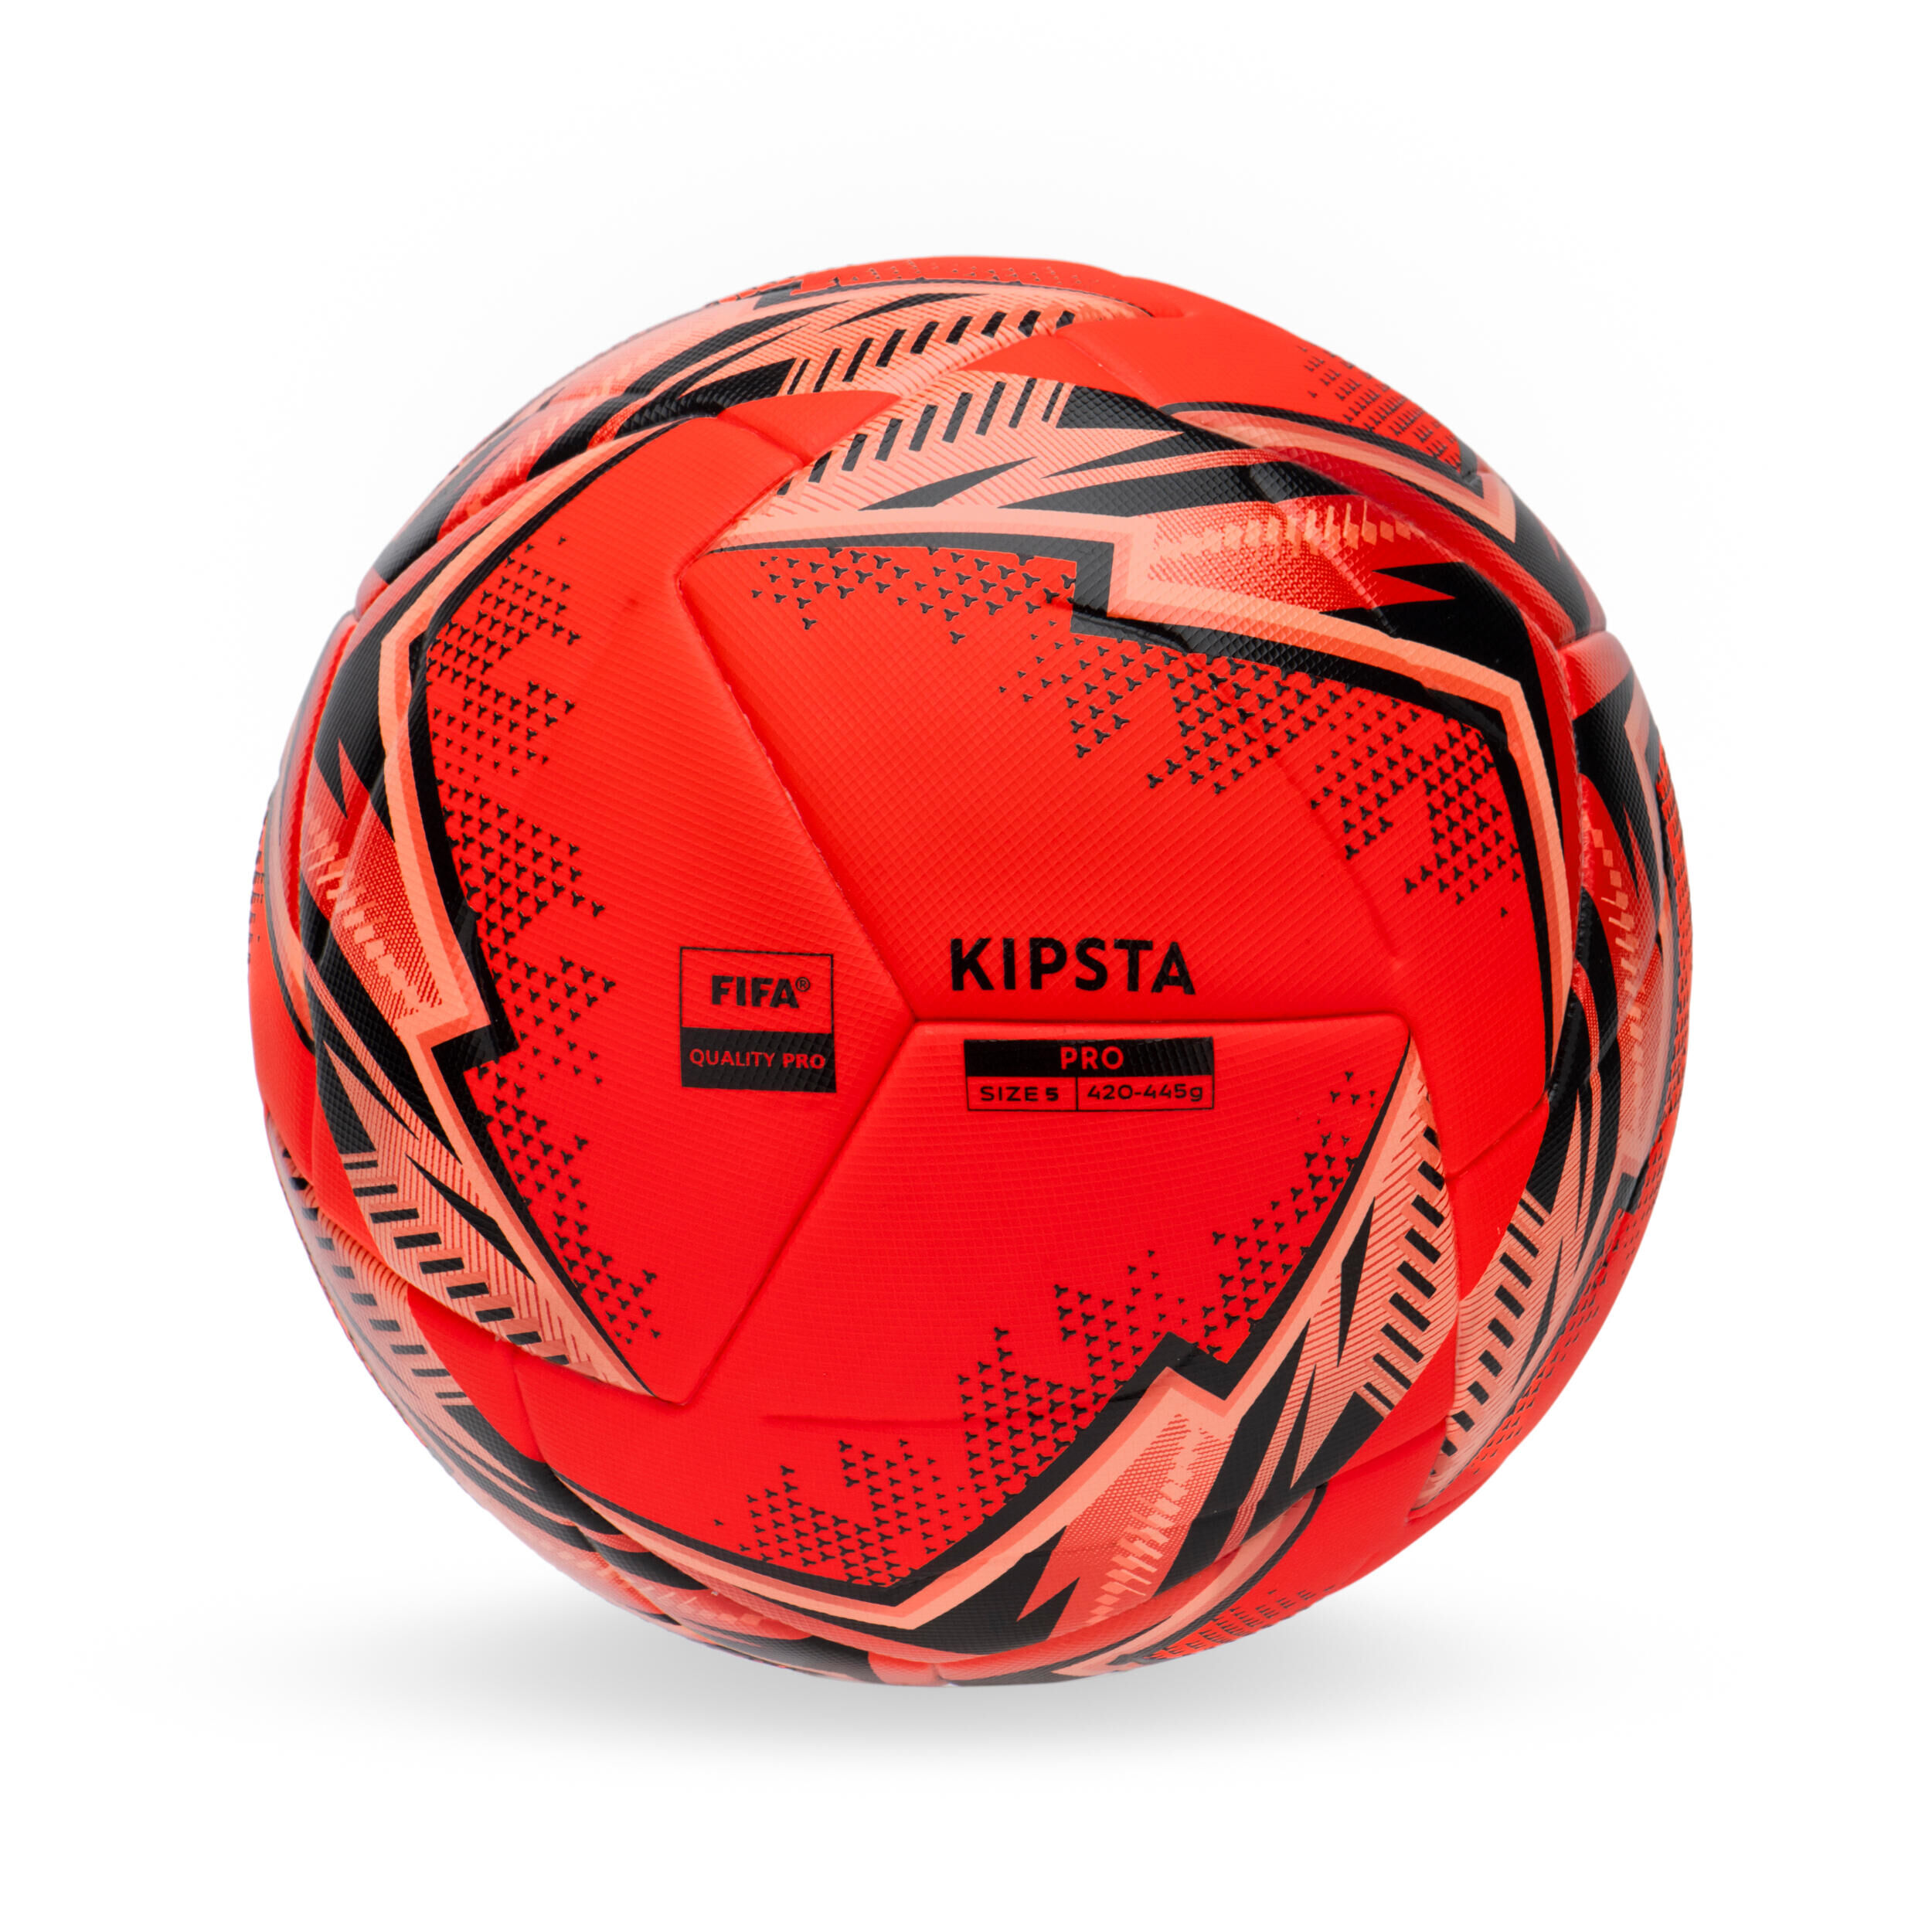 KIPSTA Thermobonded Size 5 FIFA Quality Pro Football Pro Ball - Red